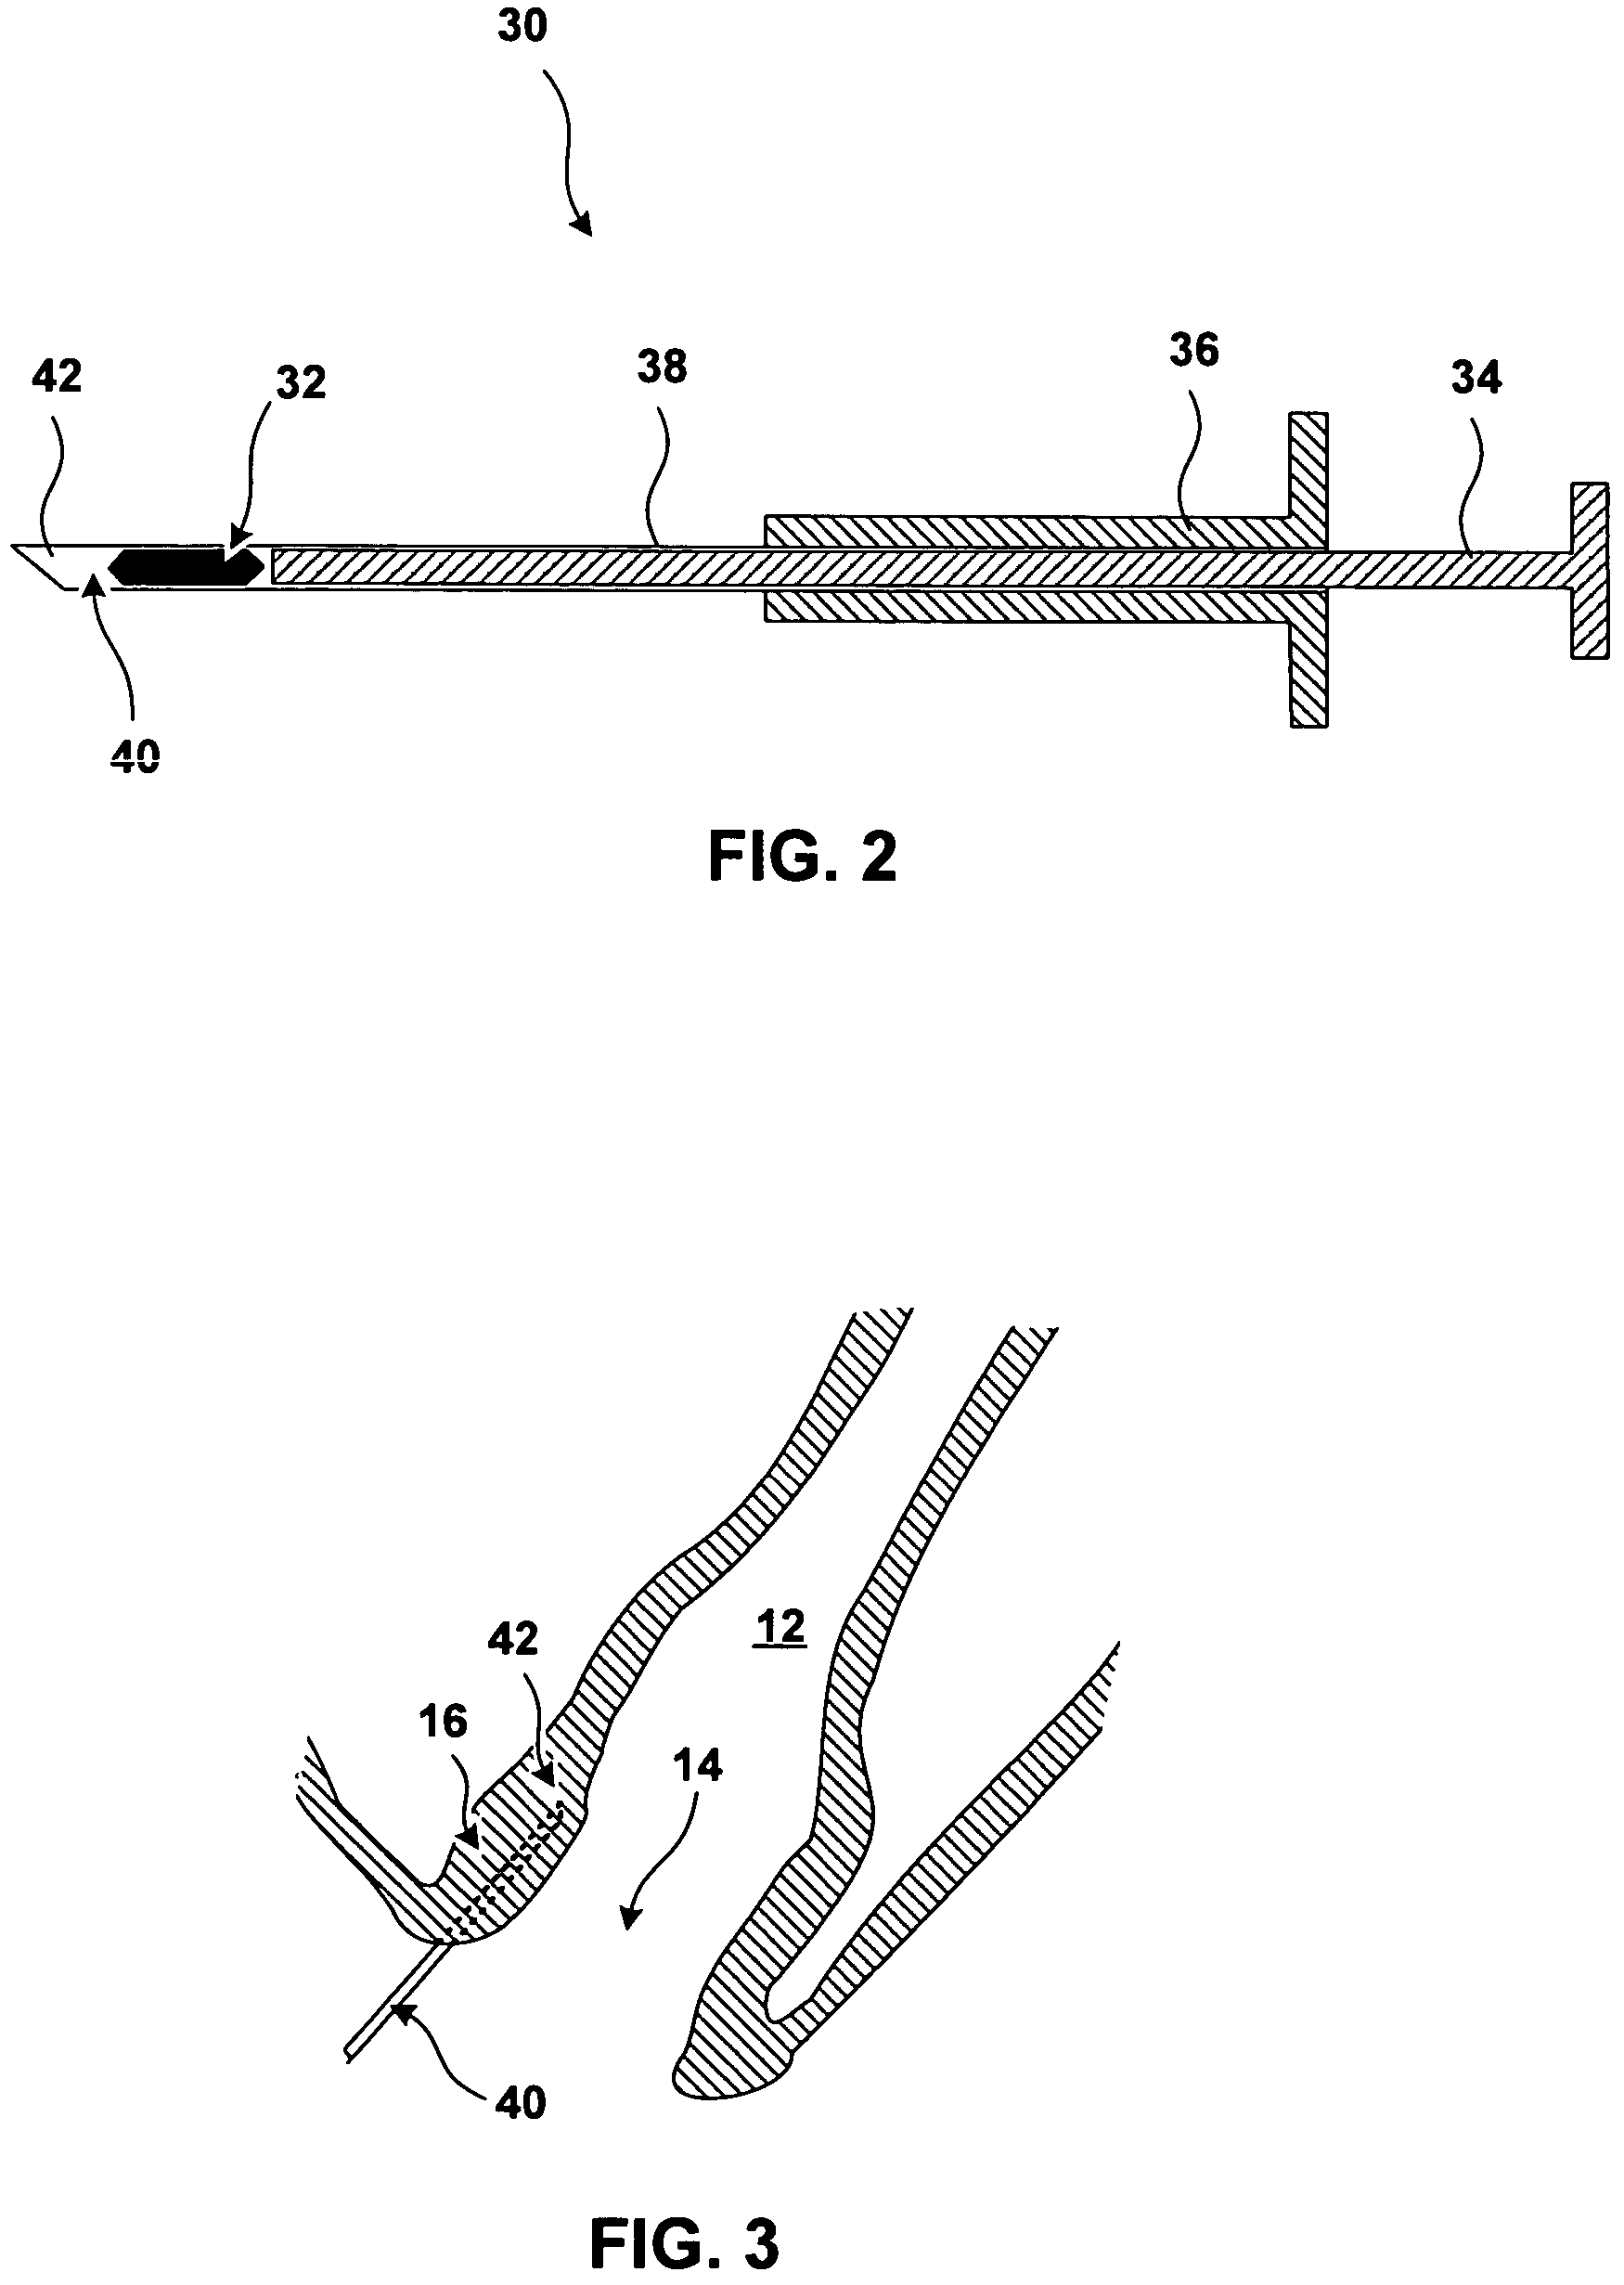 Implantable devices and methods for treating fecal incontinence